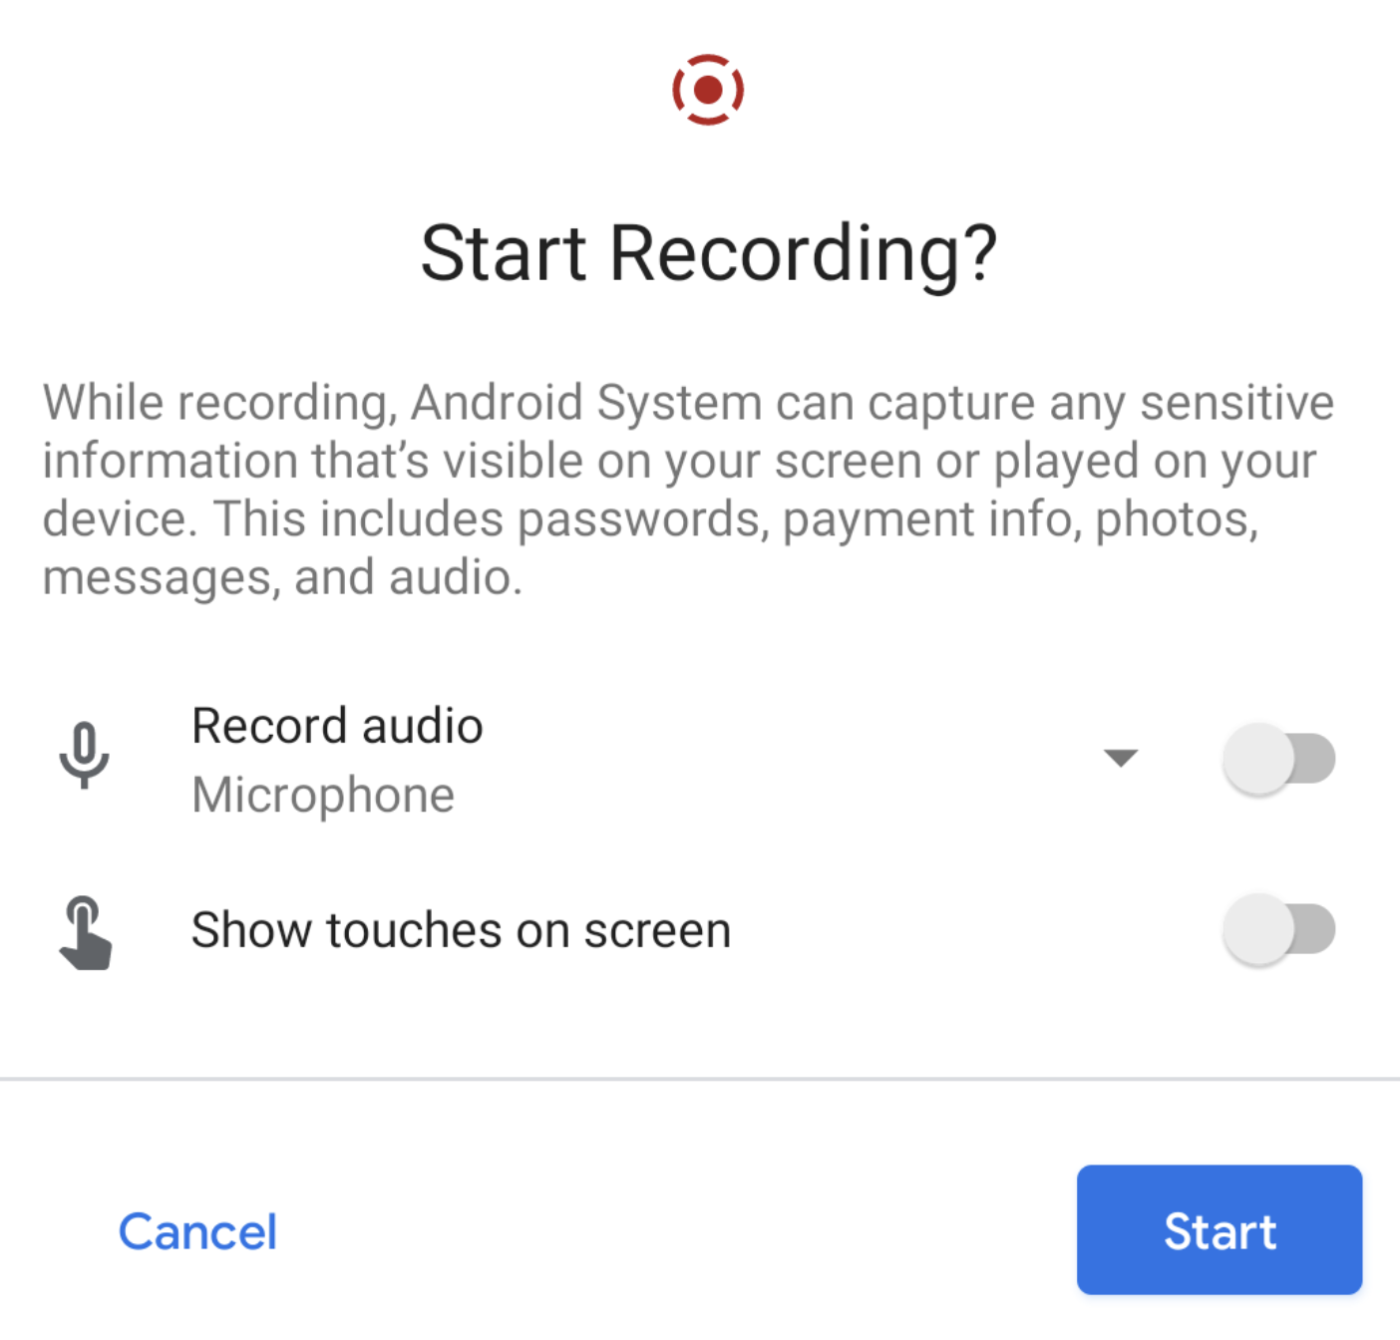 Tap Start Recording on Android to start recording